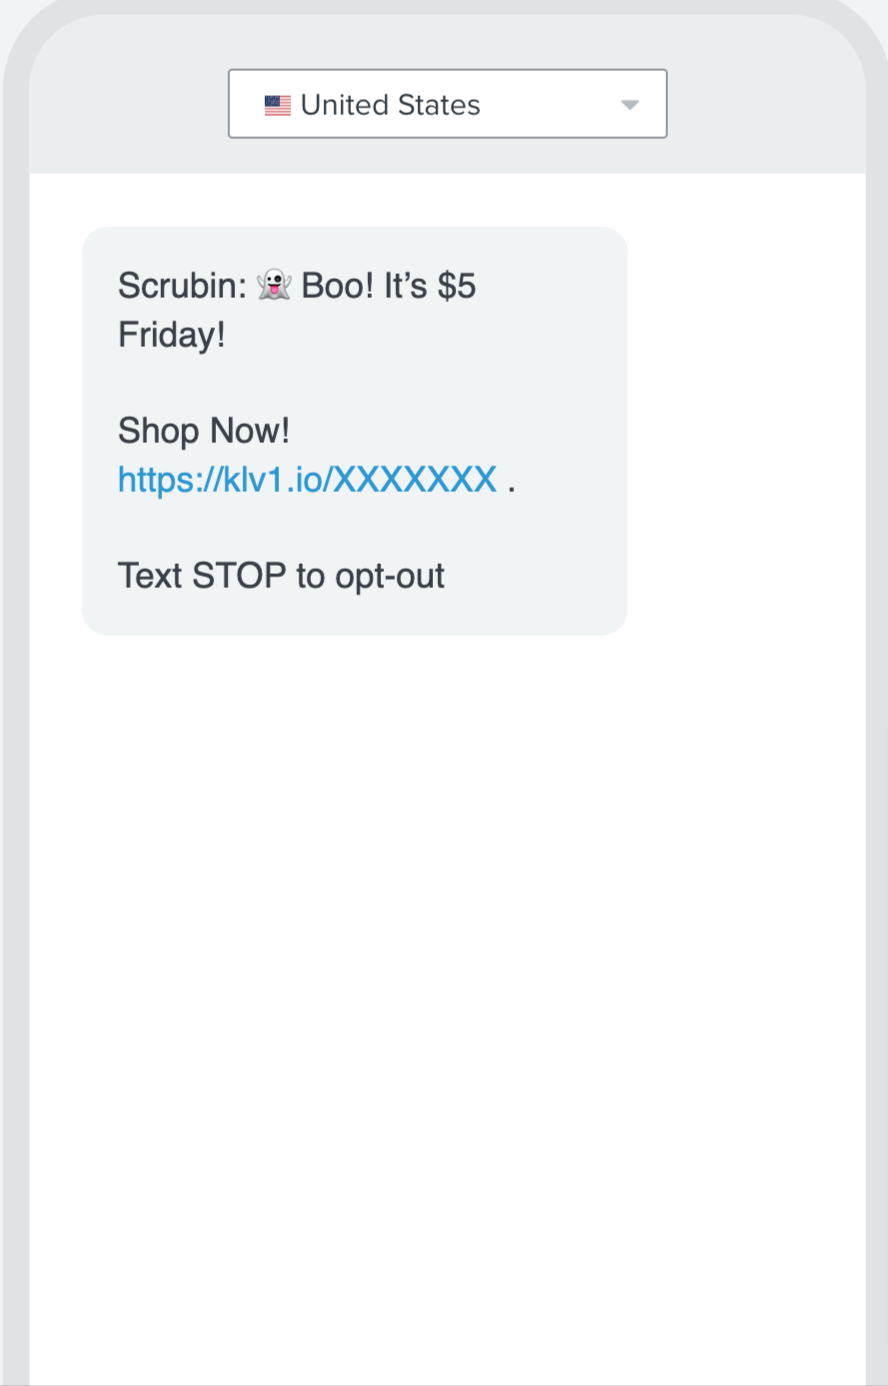 Image shows a marketing text from Scrubin